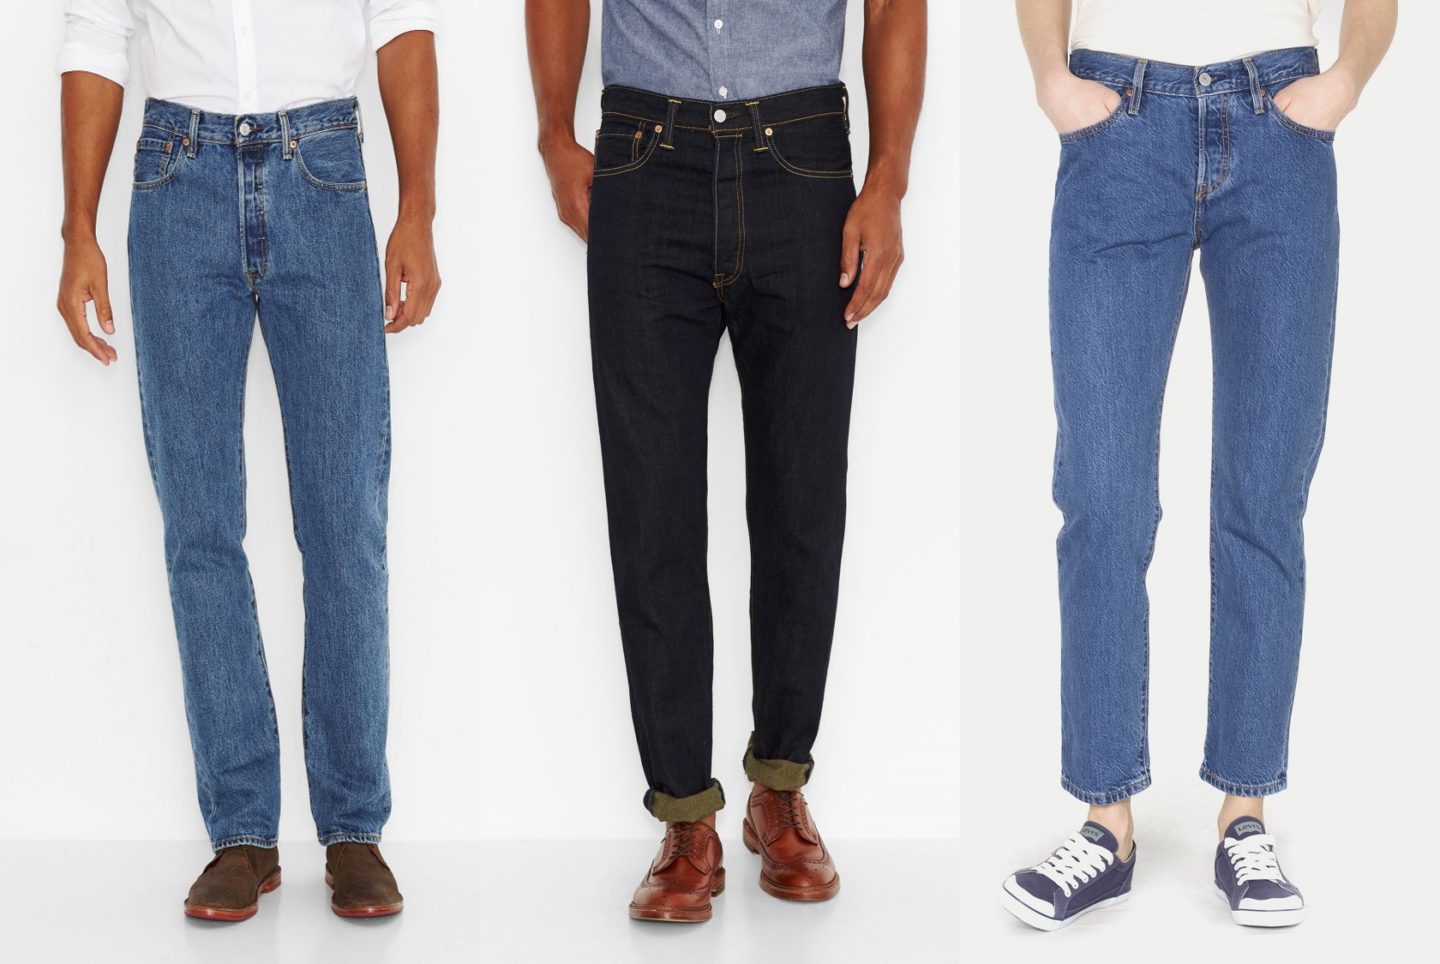 Are Mom Jeans The New Dad Jeans? - THE JEANS BLOG